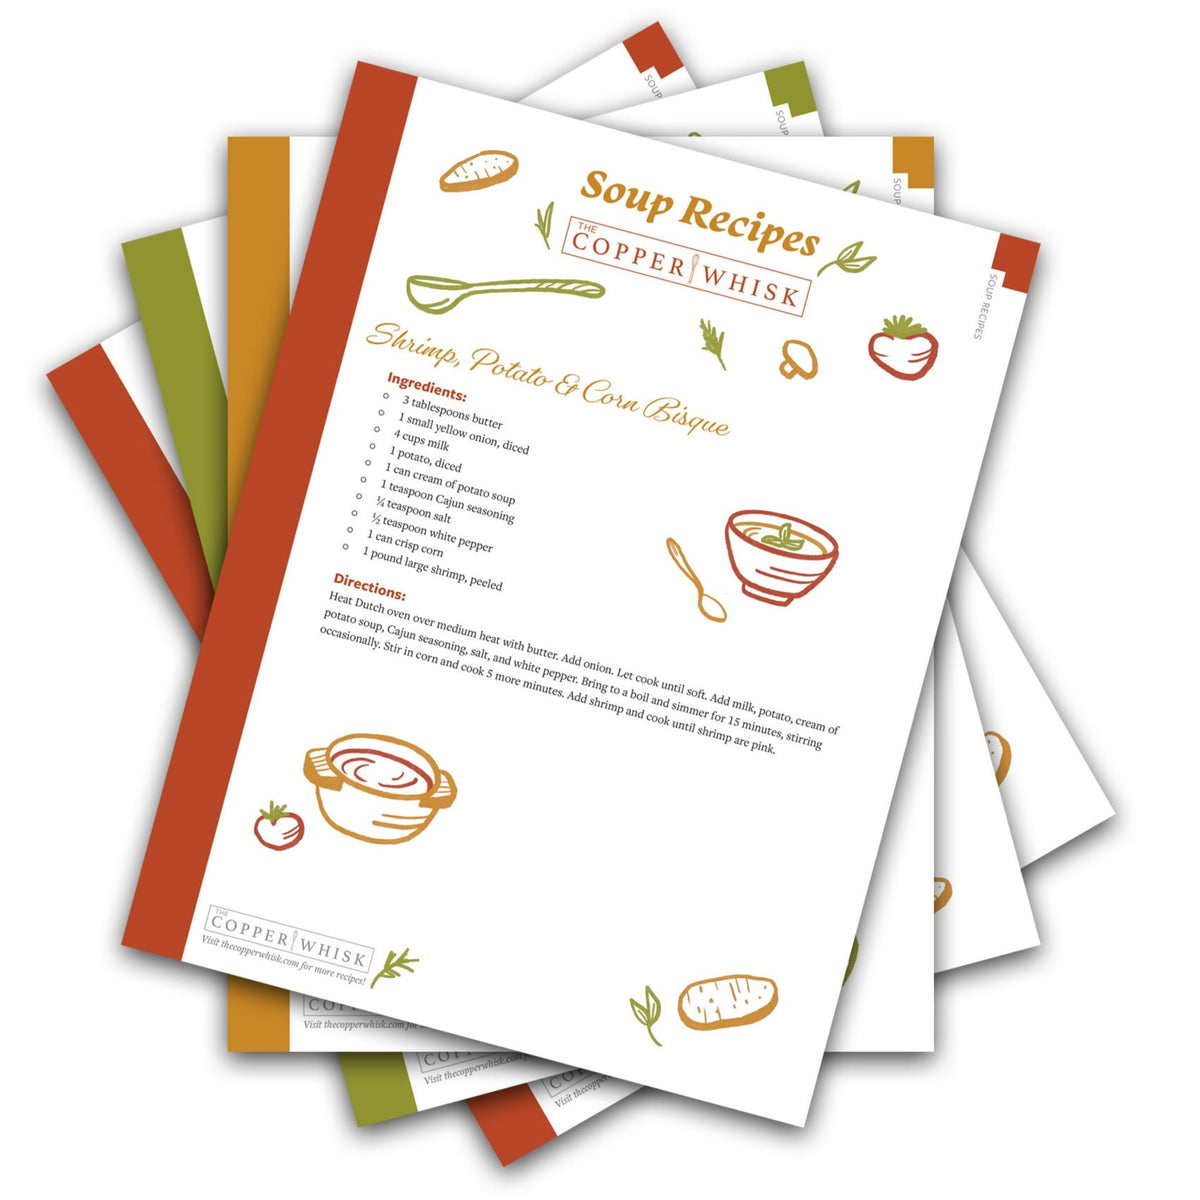 Winter Recipes: Soup ideas from The Copper Whisk (Physical Recipe Cards)